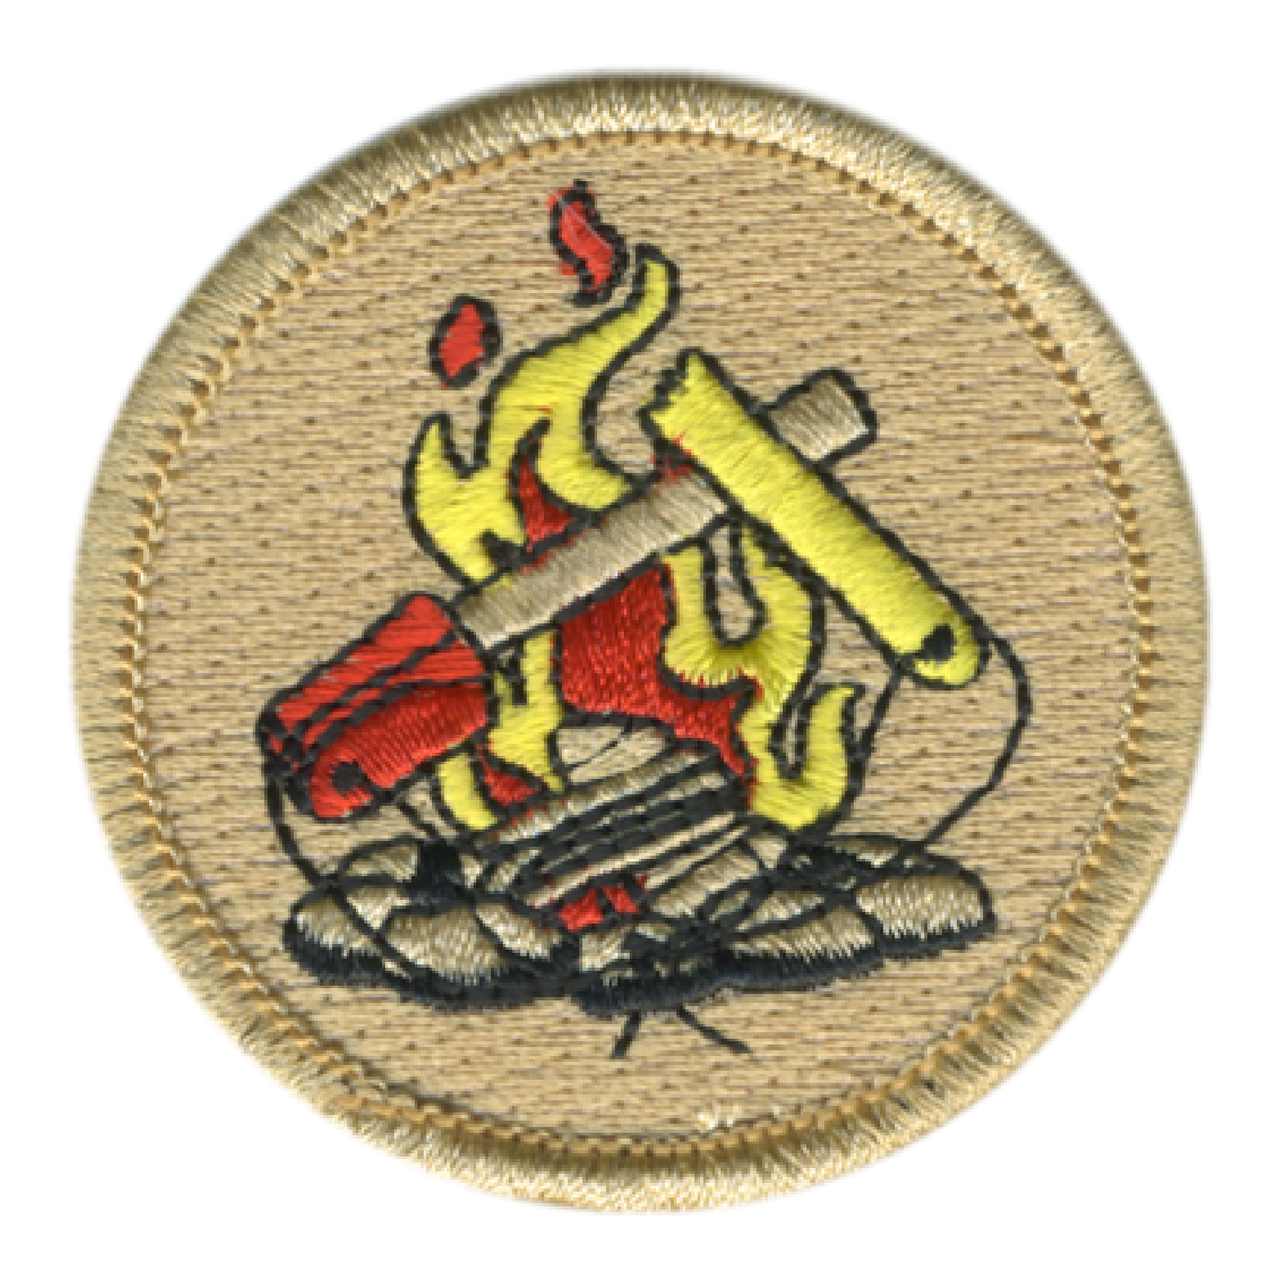 Patch and Flint Steel Campfire Patrol